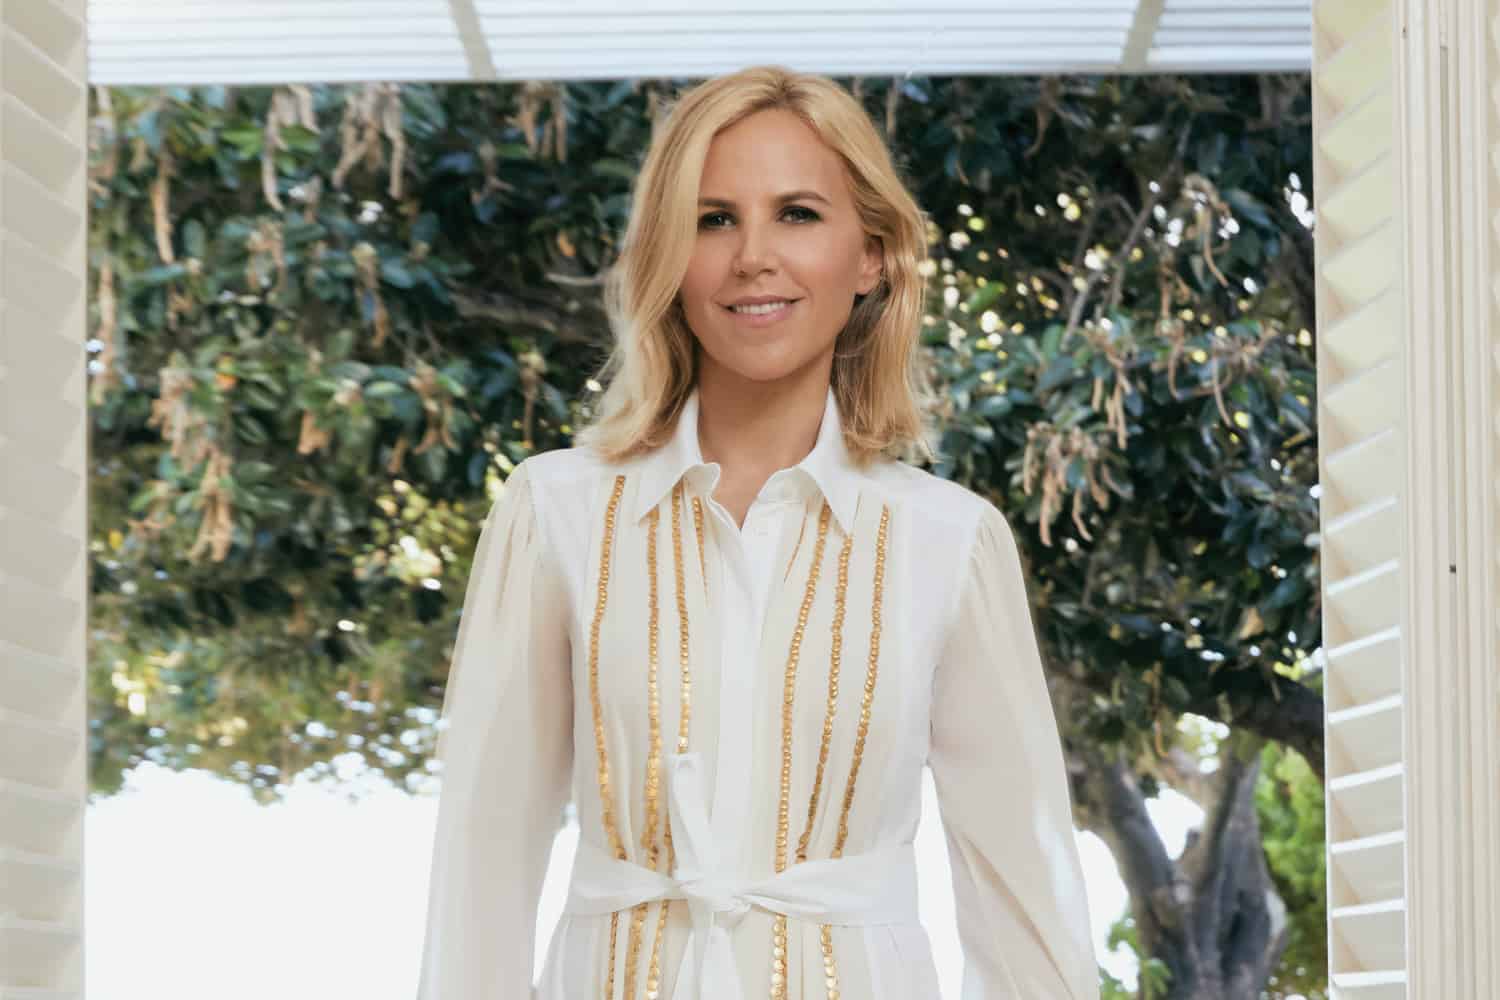 Tory Burch Reveals How She'll Spend Her Summer & What She'll Wear